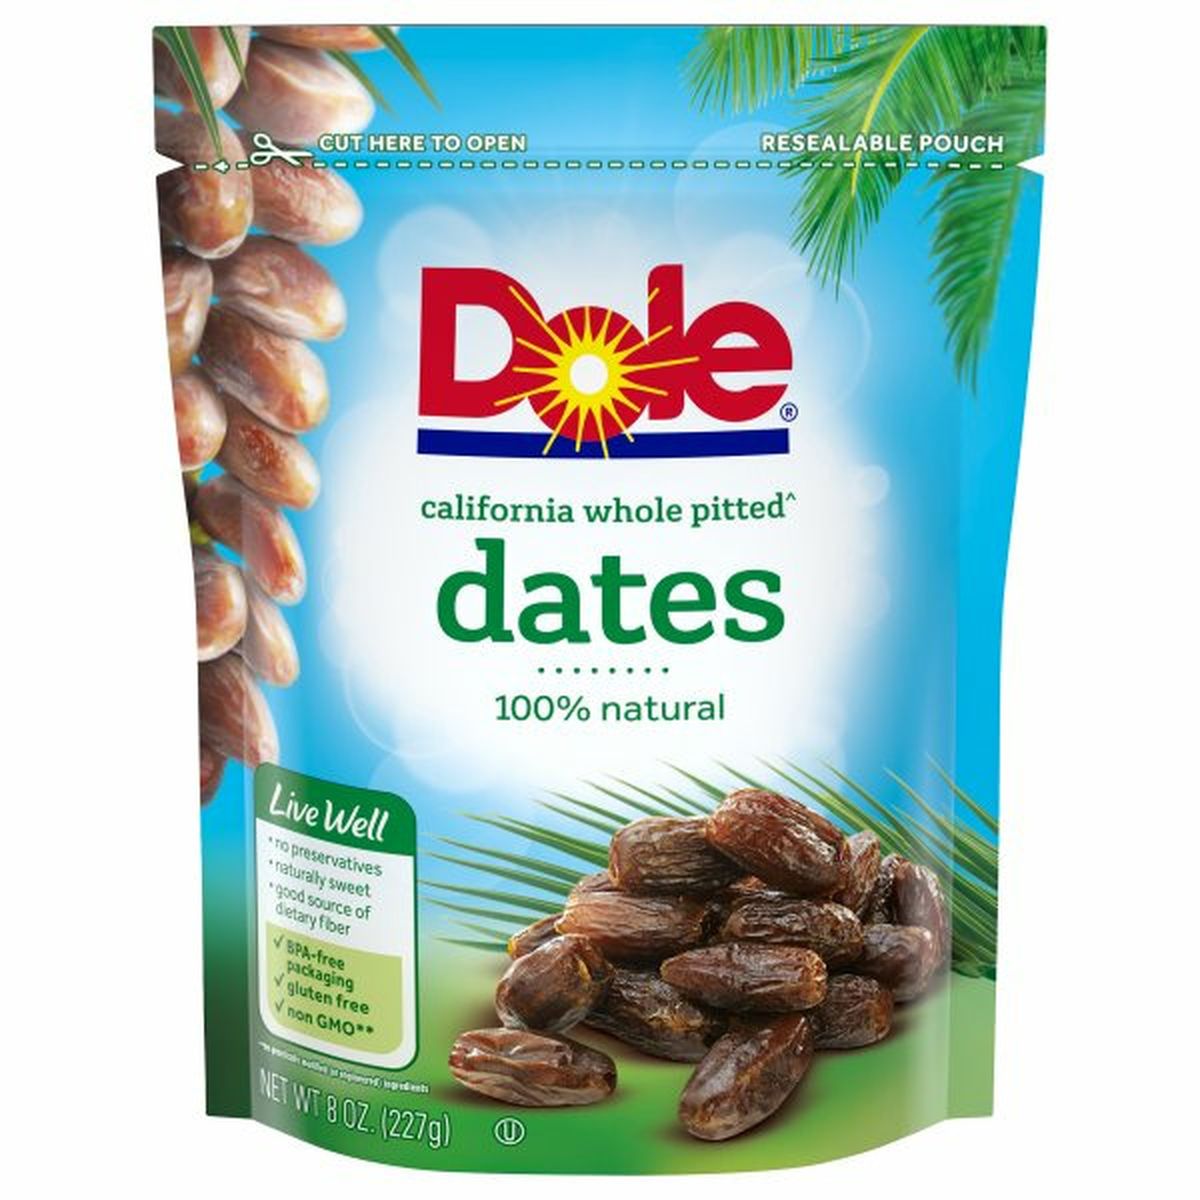 Calories in Dole Dates, California Whole Pitted